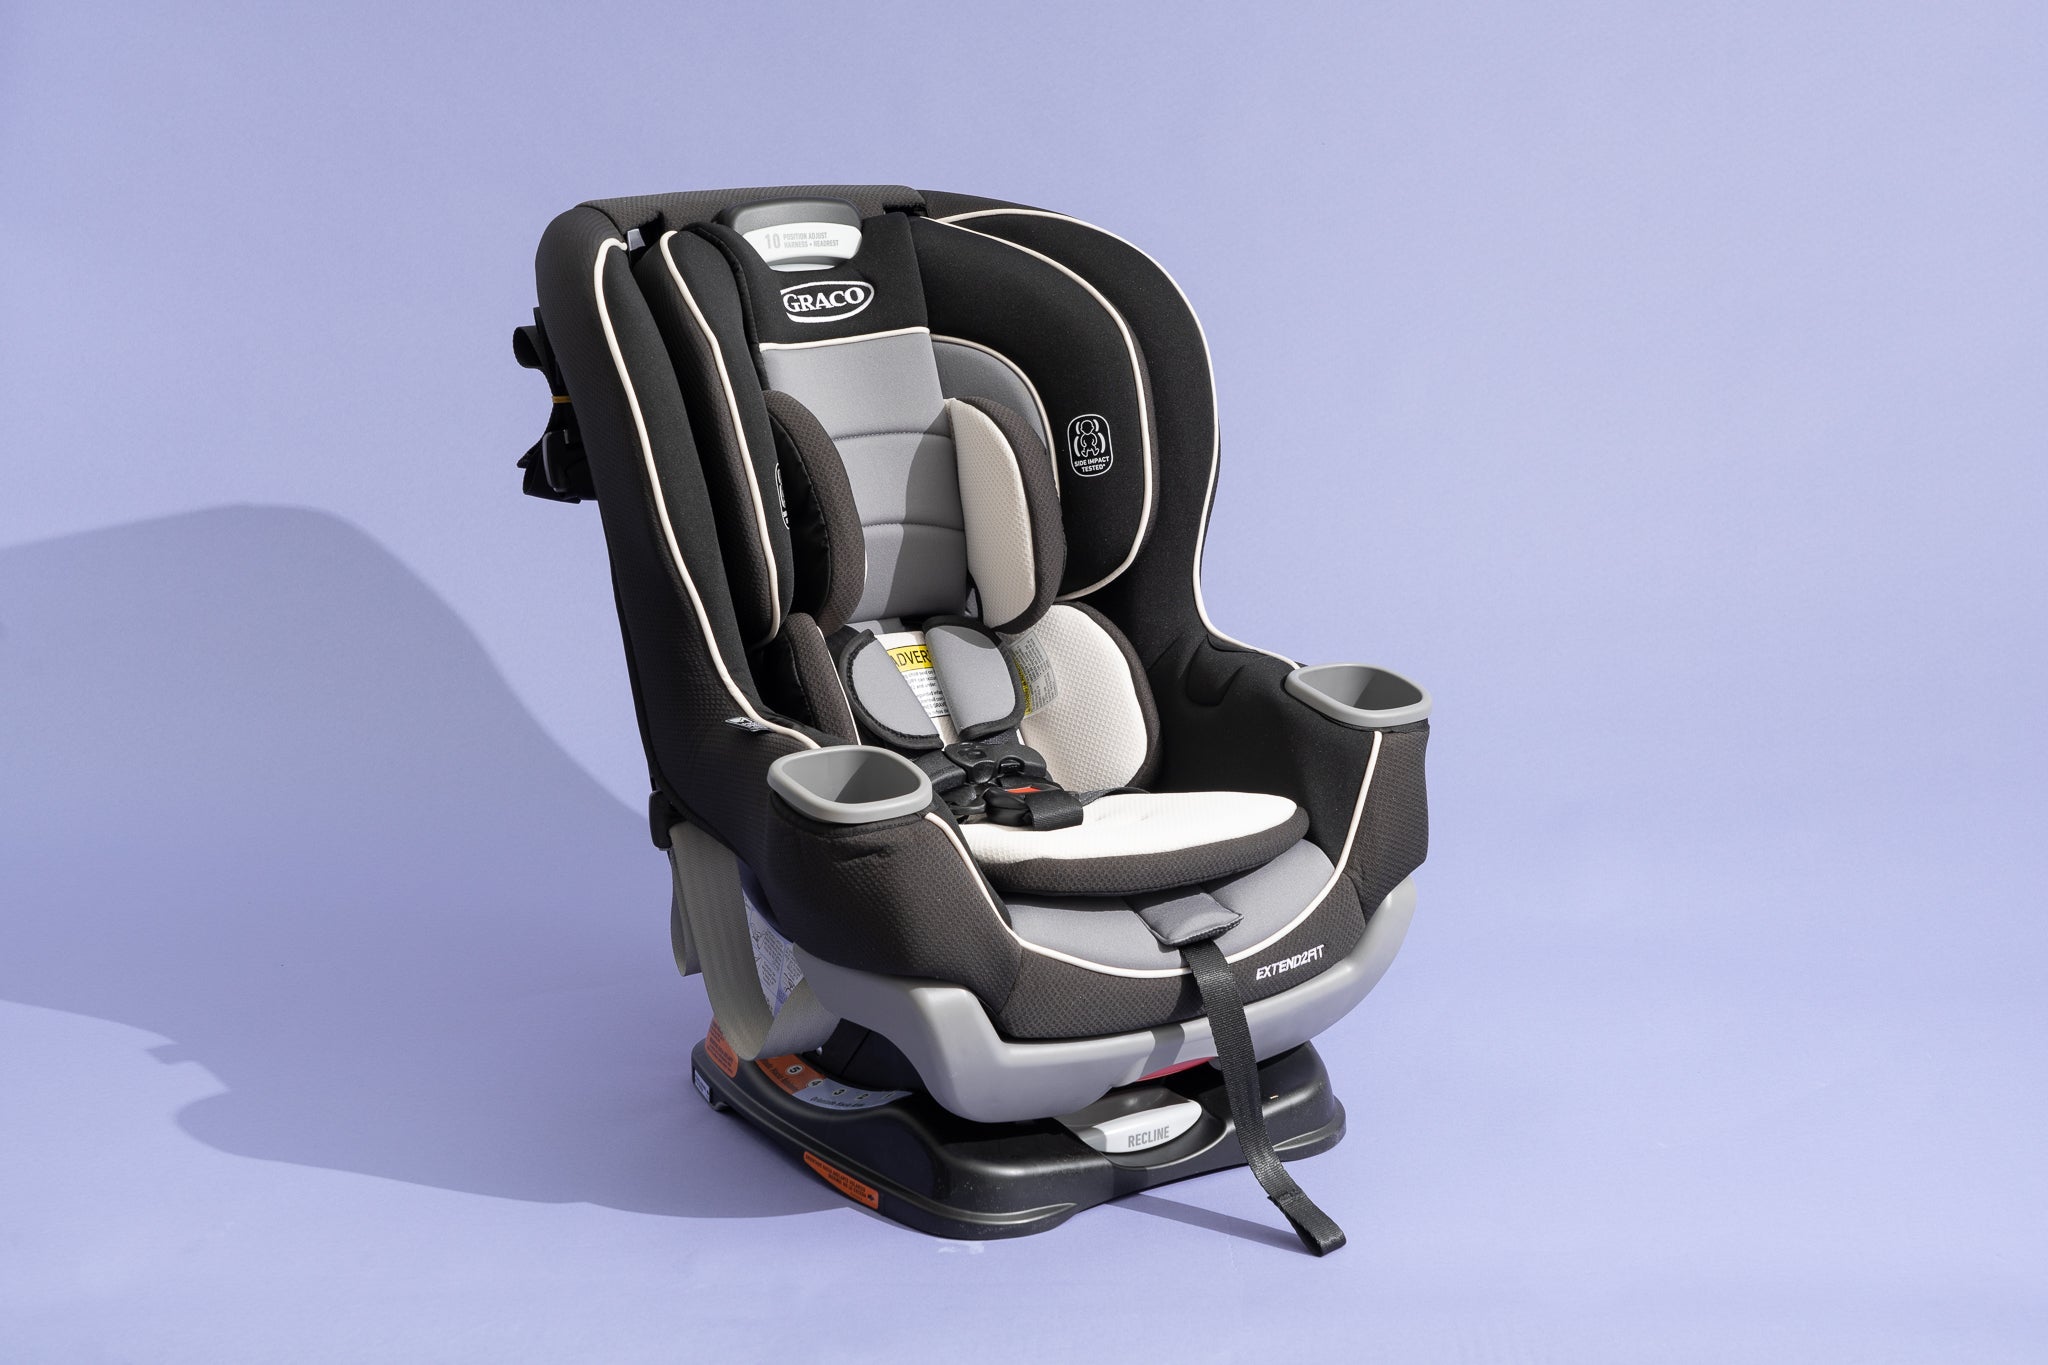 Can You Wash Graco Car Seat Covers? A Comprehensive Guide